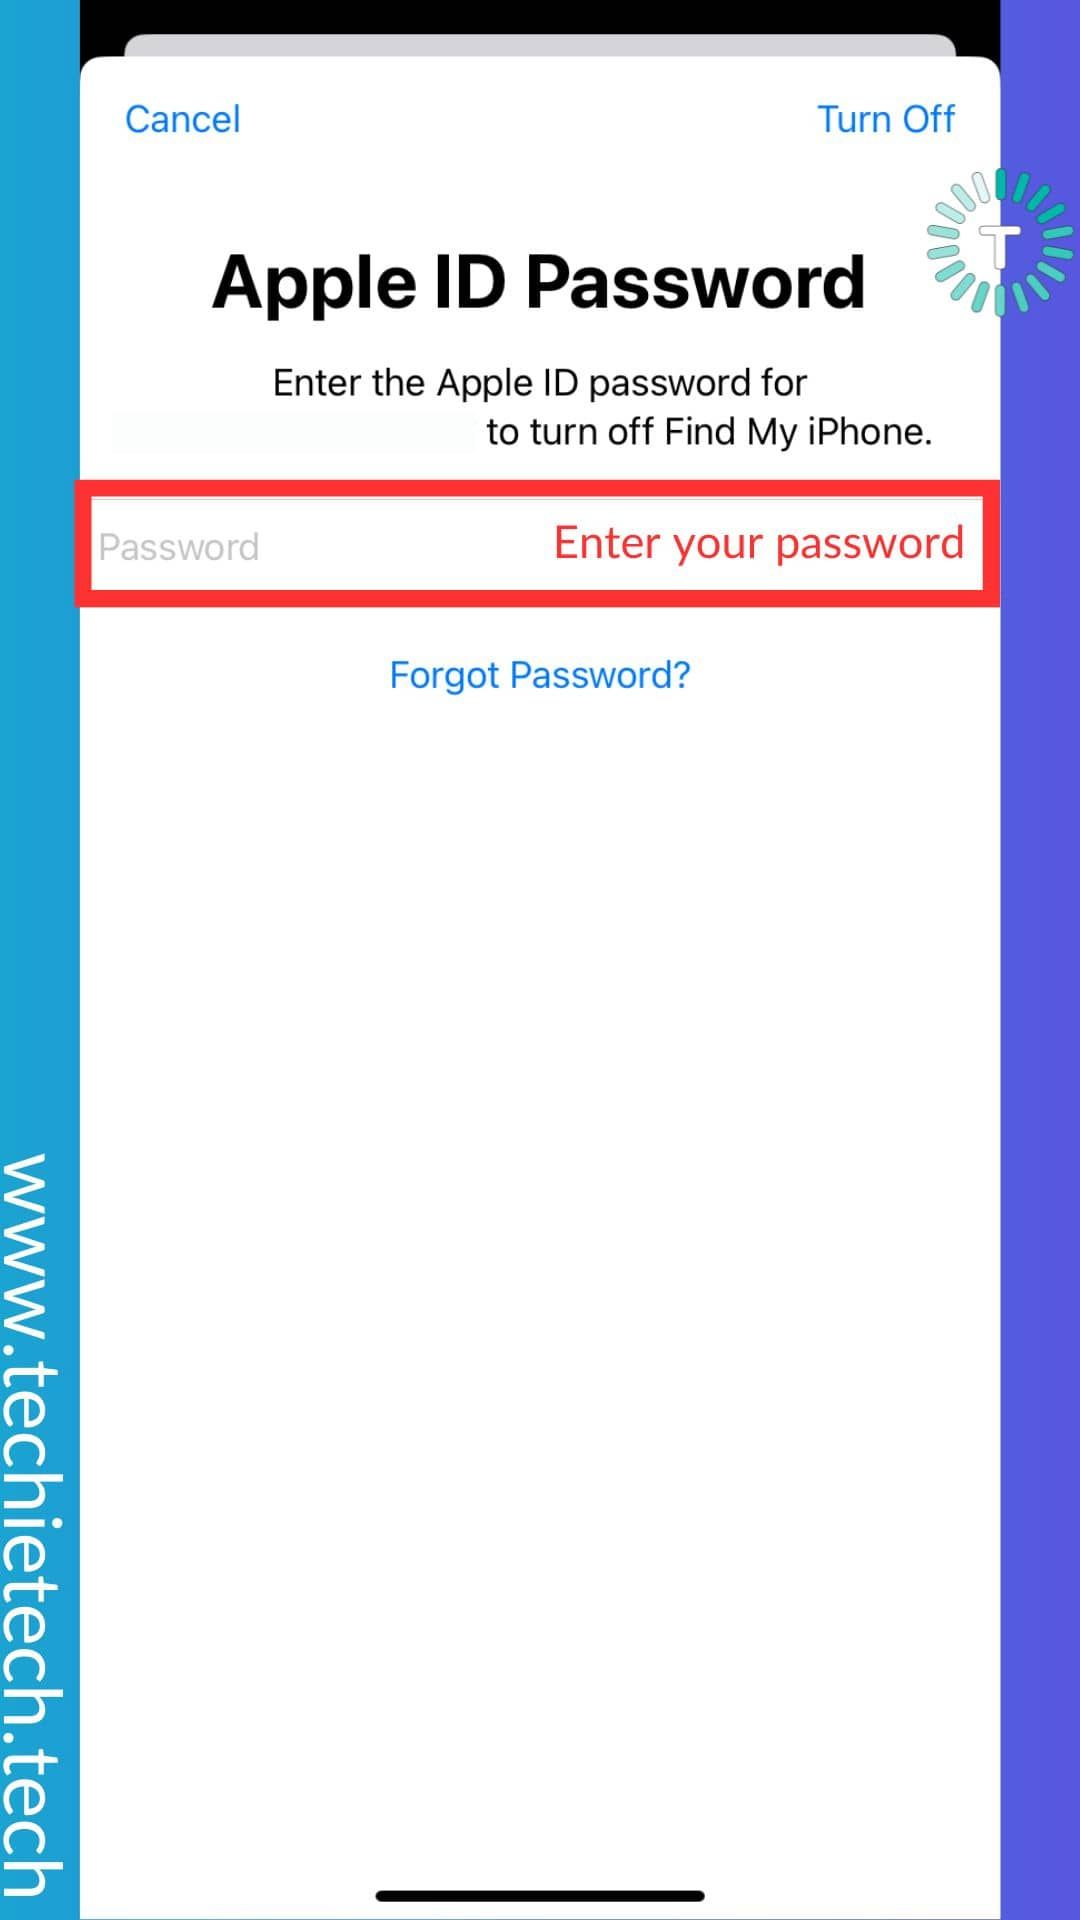 enter your Apple ID password and tap Turn Off,